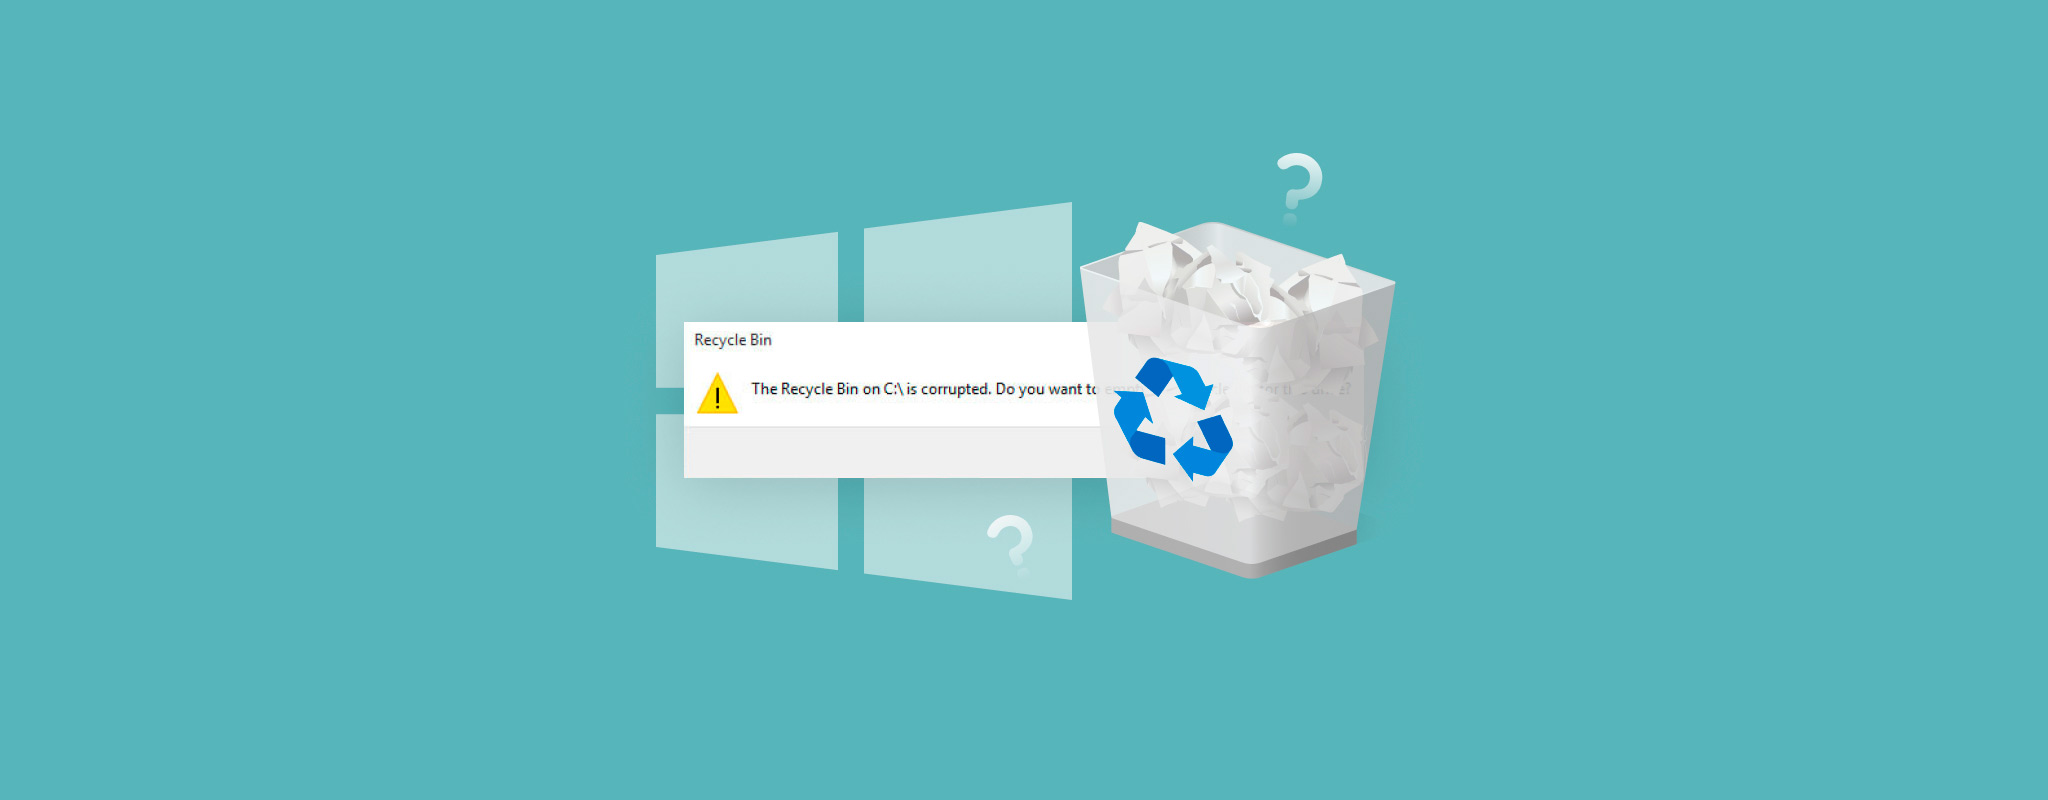 recycle bin corrupted